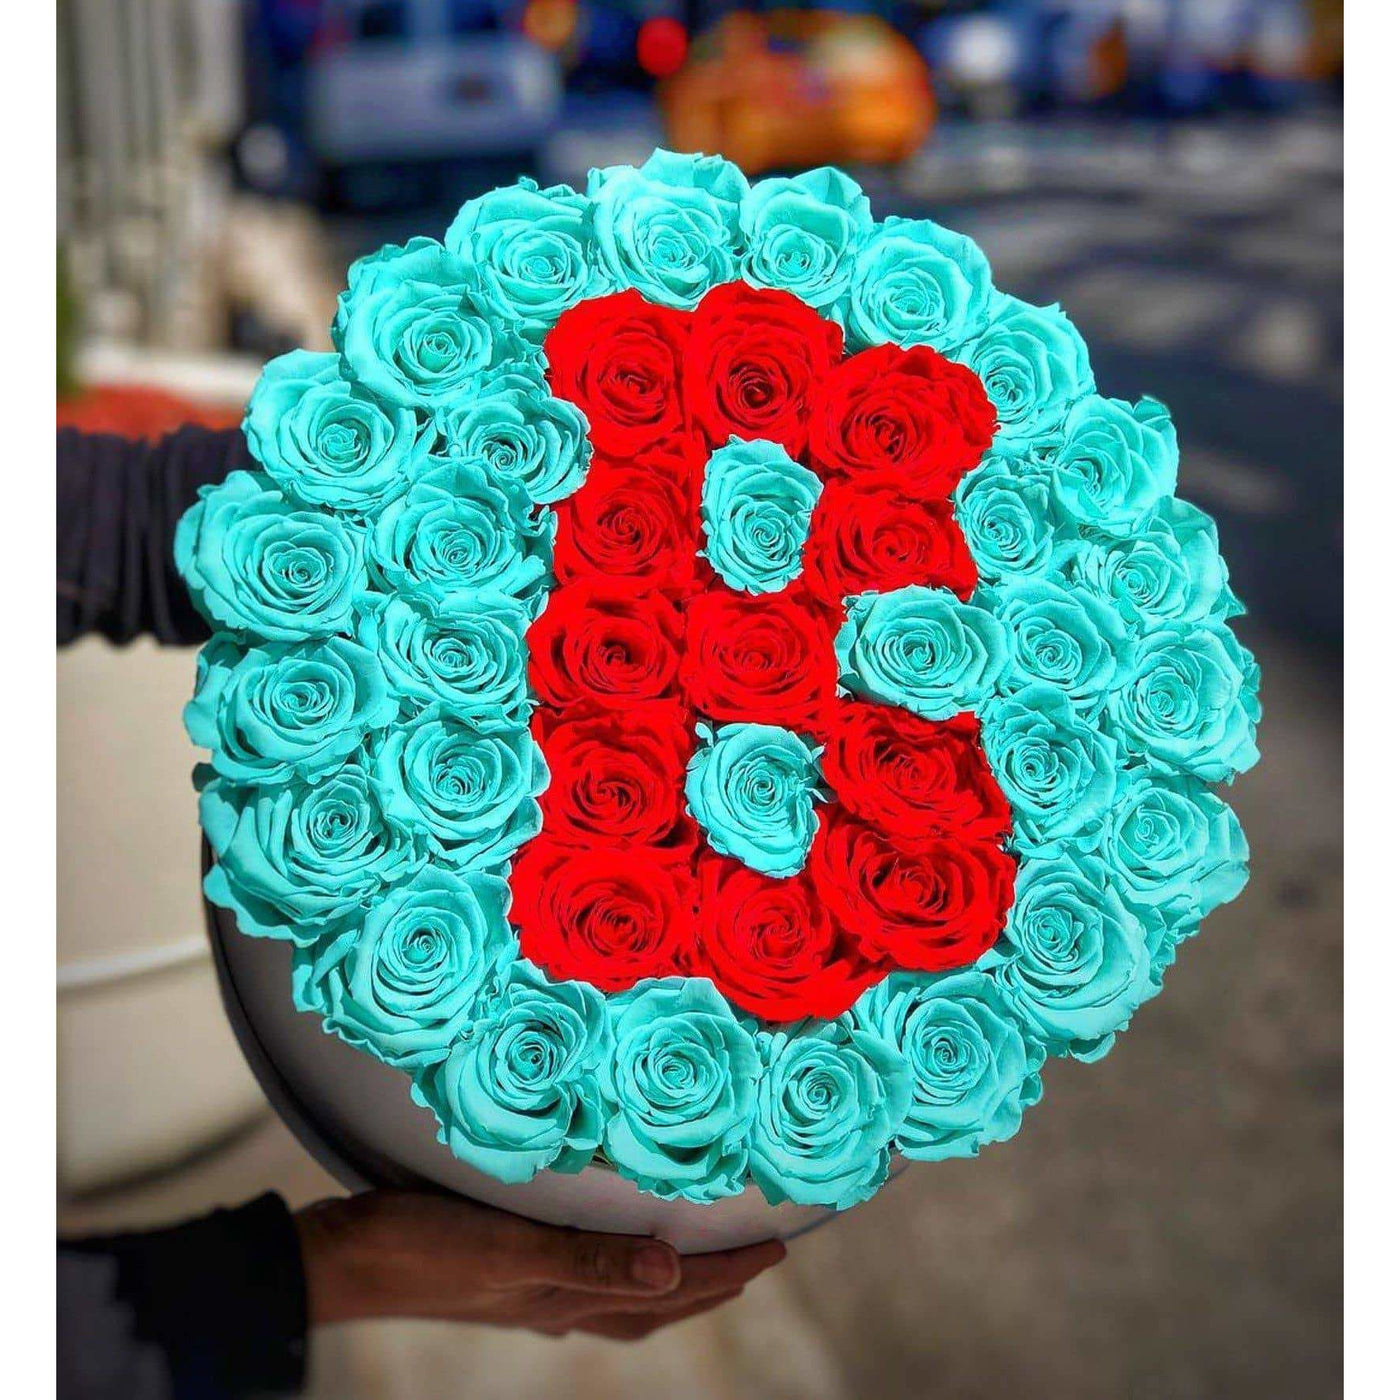 Tiffany Blue & Red Roses That Last A Year - Custom Deluxe Rose Box